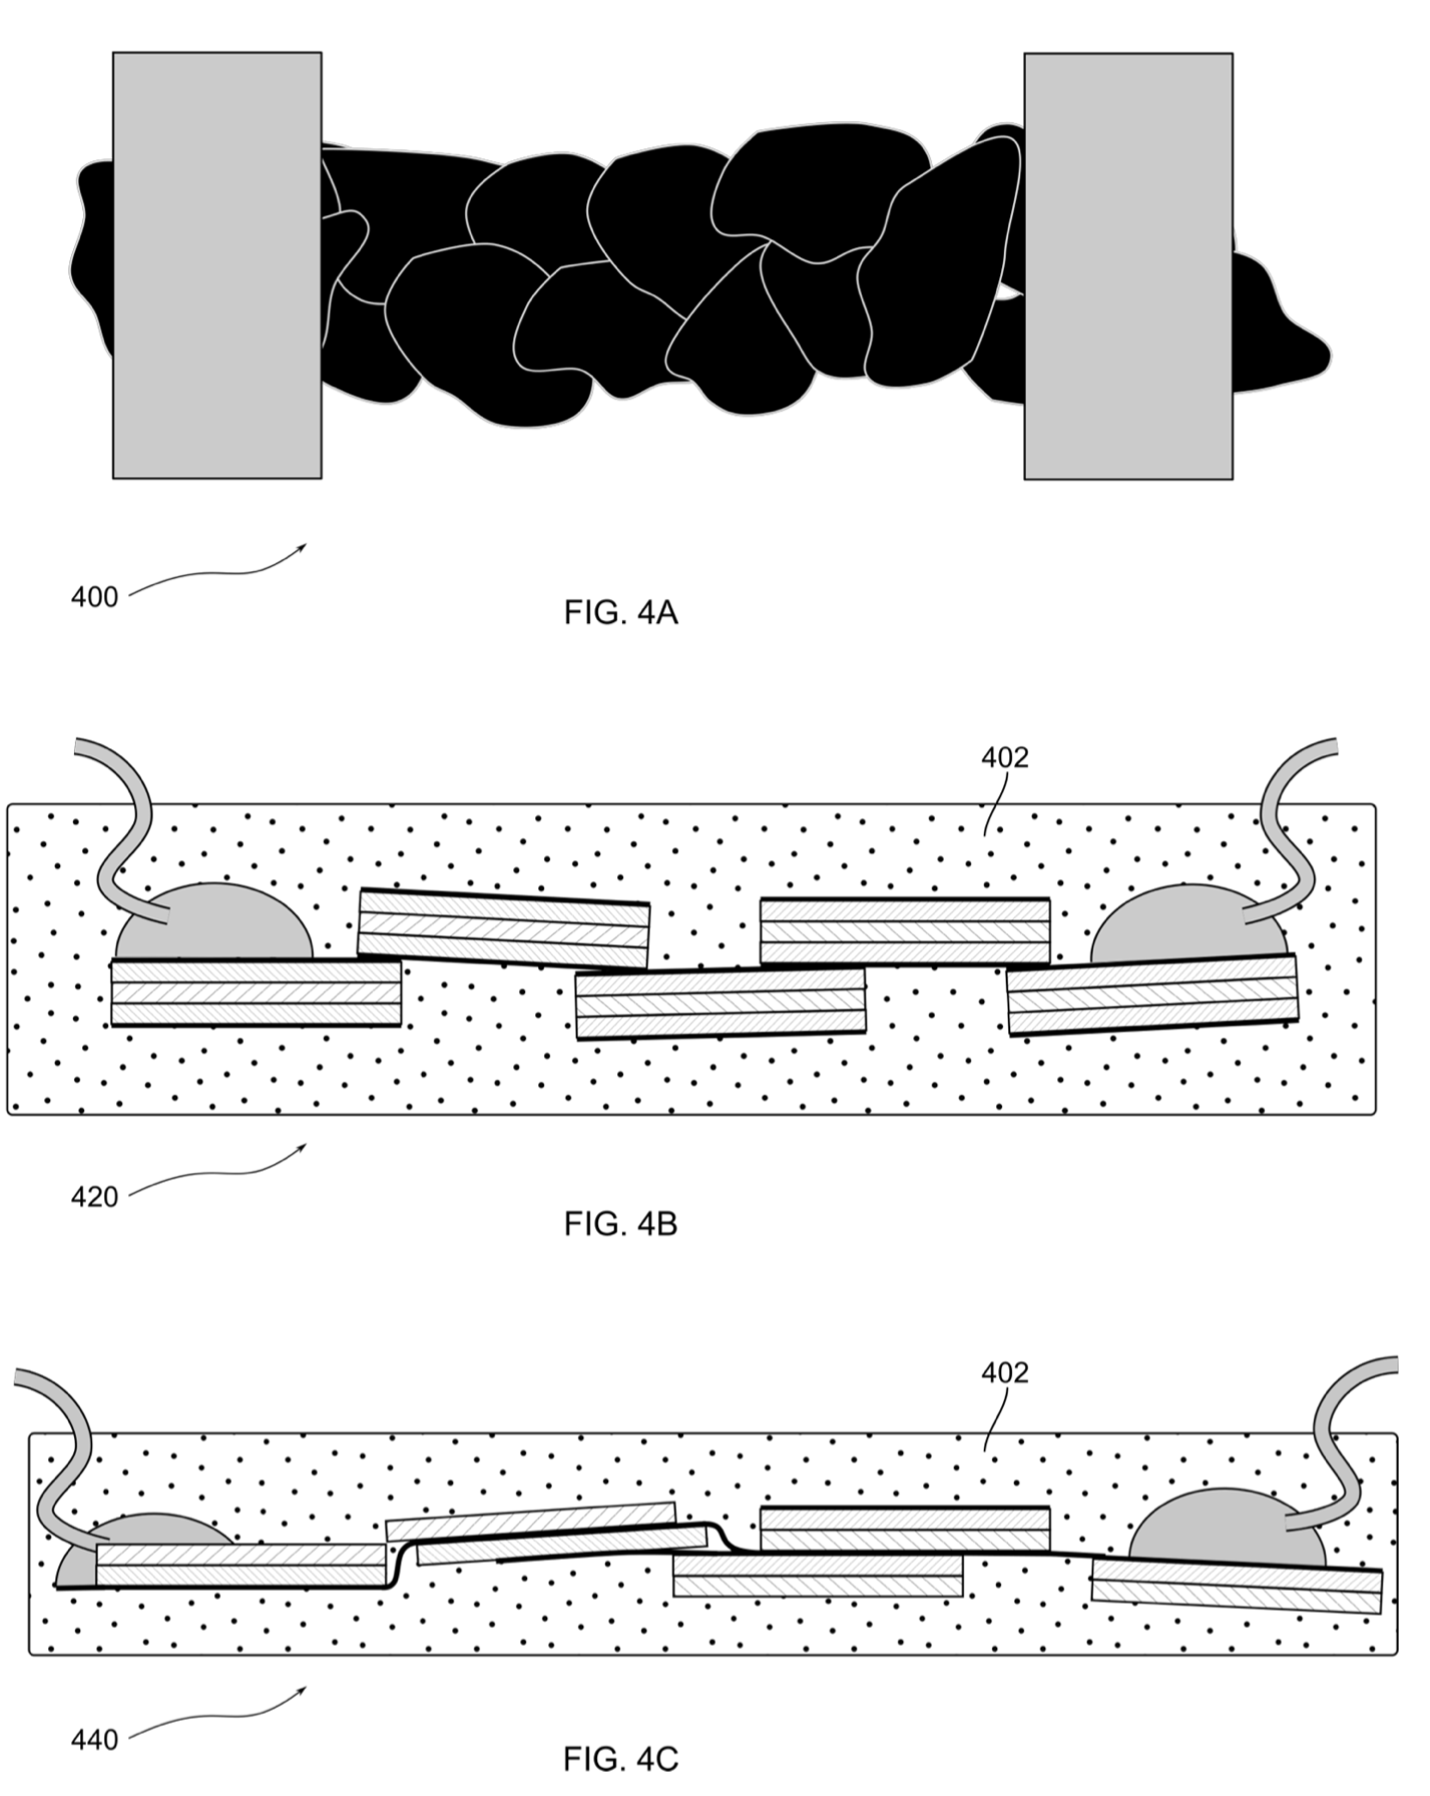 Fig 4A: Misshapen flakes overlap to form a horizontal bar 2 flakes deep. Gray boxes cover left and right ends. Fig 4B: Rectangular block dotted to represent insulating material encloses 4 3-layer, randomly overlapping bars. Circular contacts at each end. Fig 4C: Same as 4B with 2-layer bars with one set of layers offset.